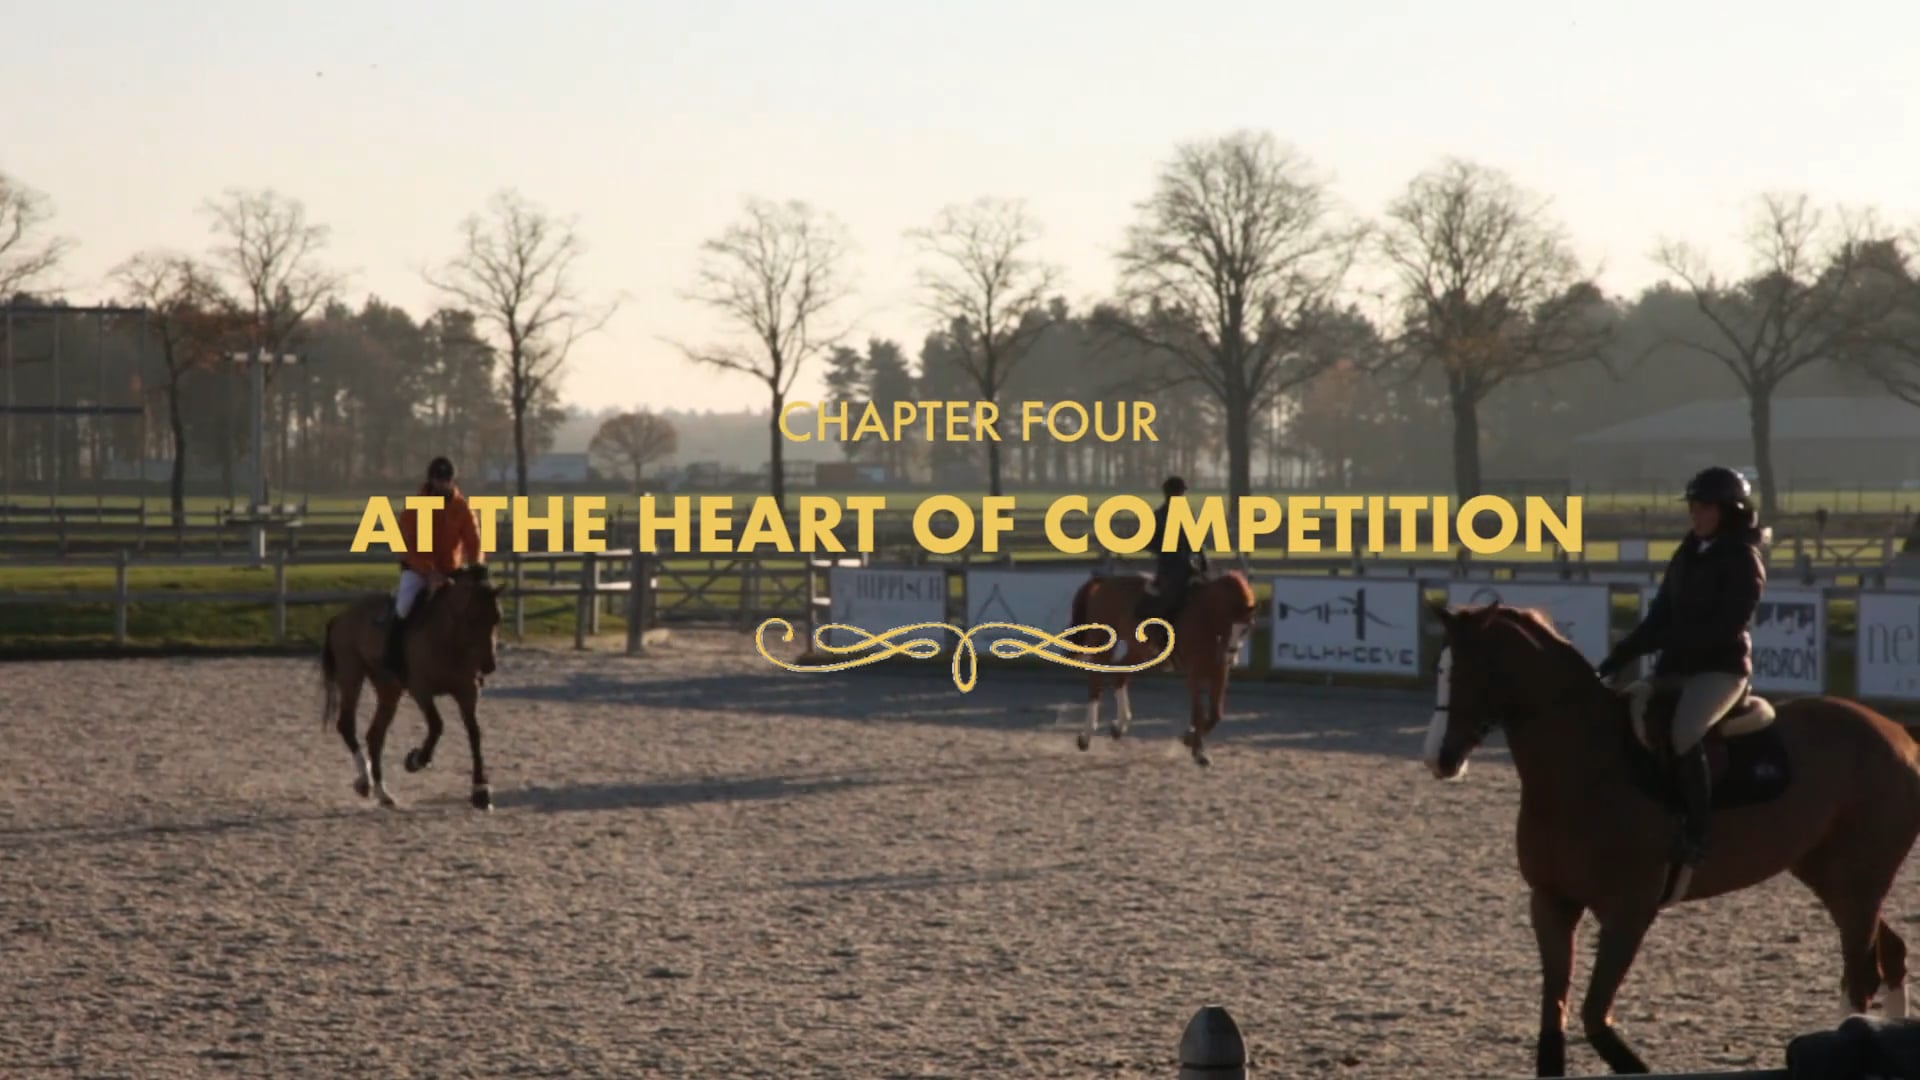 Chapter Four: At the Heart of Competition